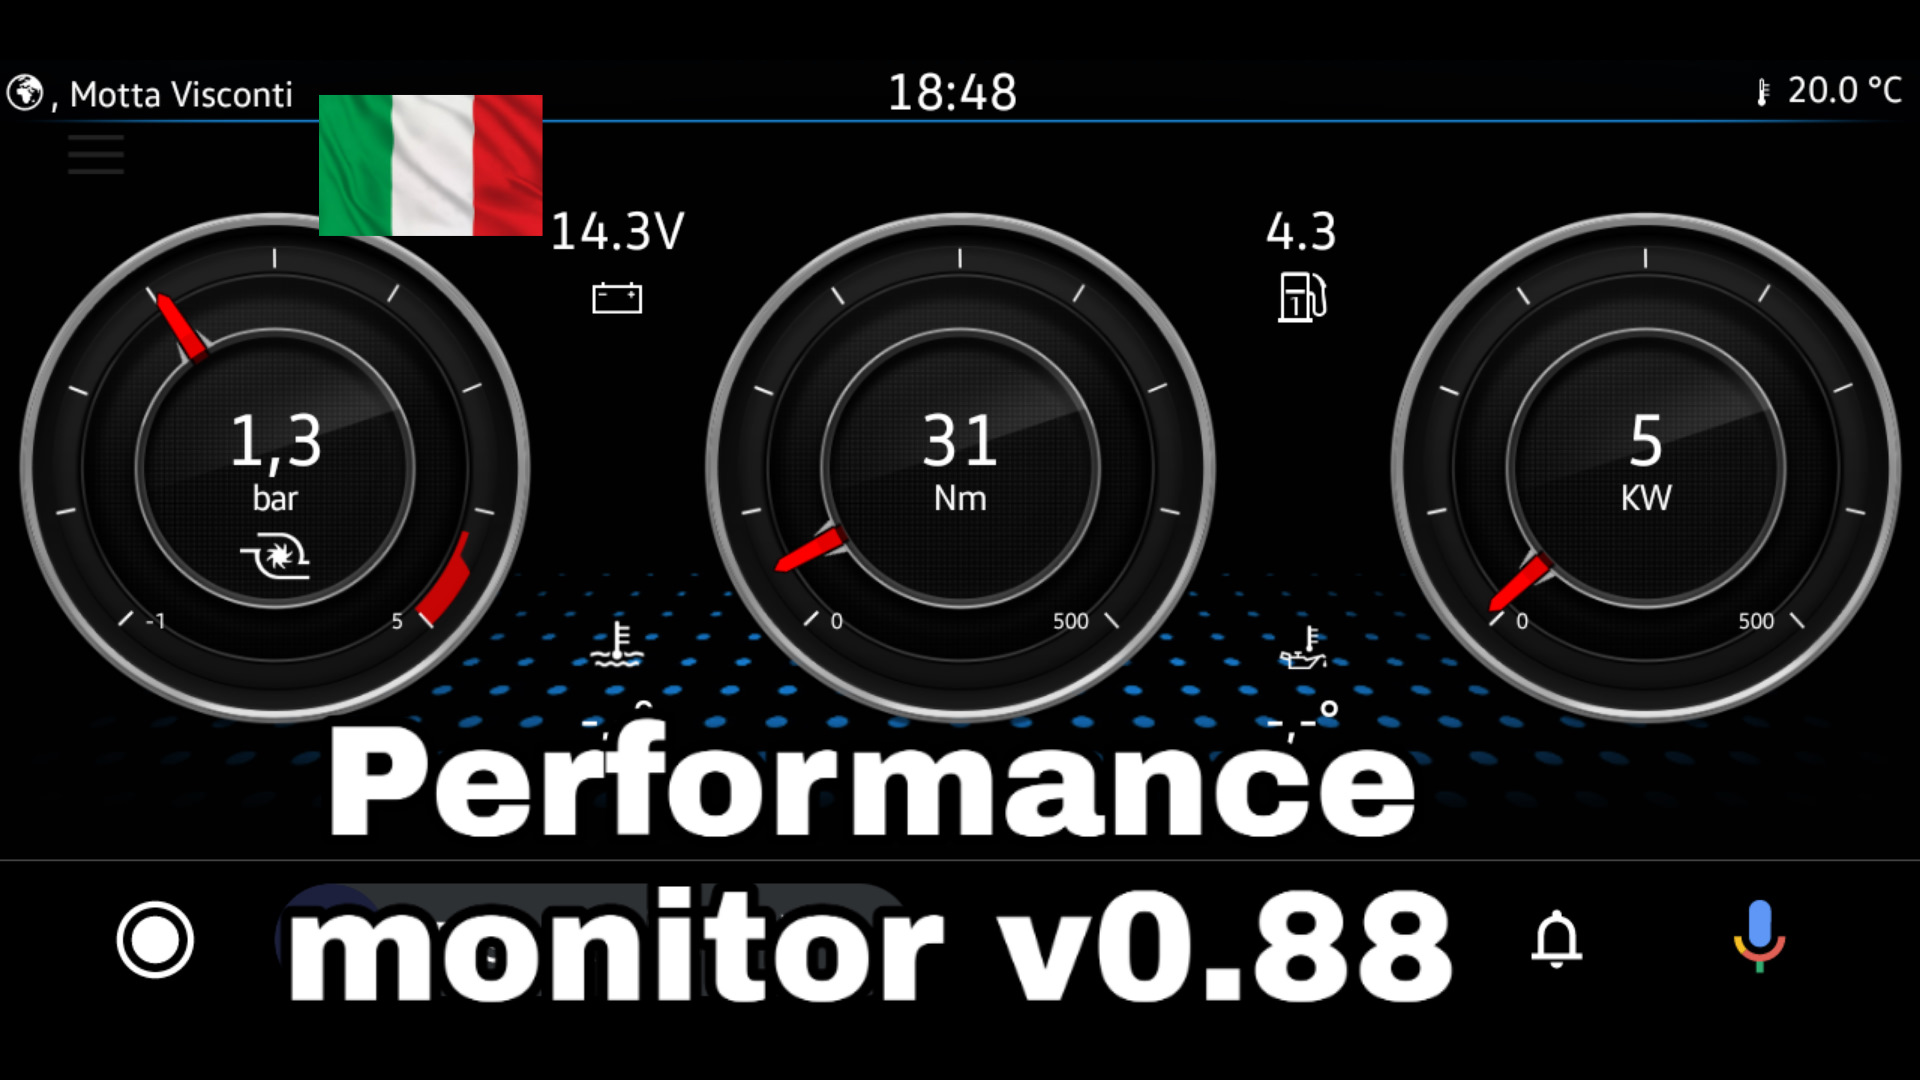 Android performance. Performance Monitor. Performance Monitor drive2. Performance Monitor Android. Performance Monitor VAG.